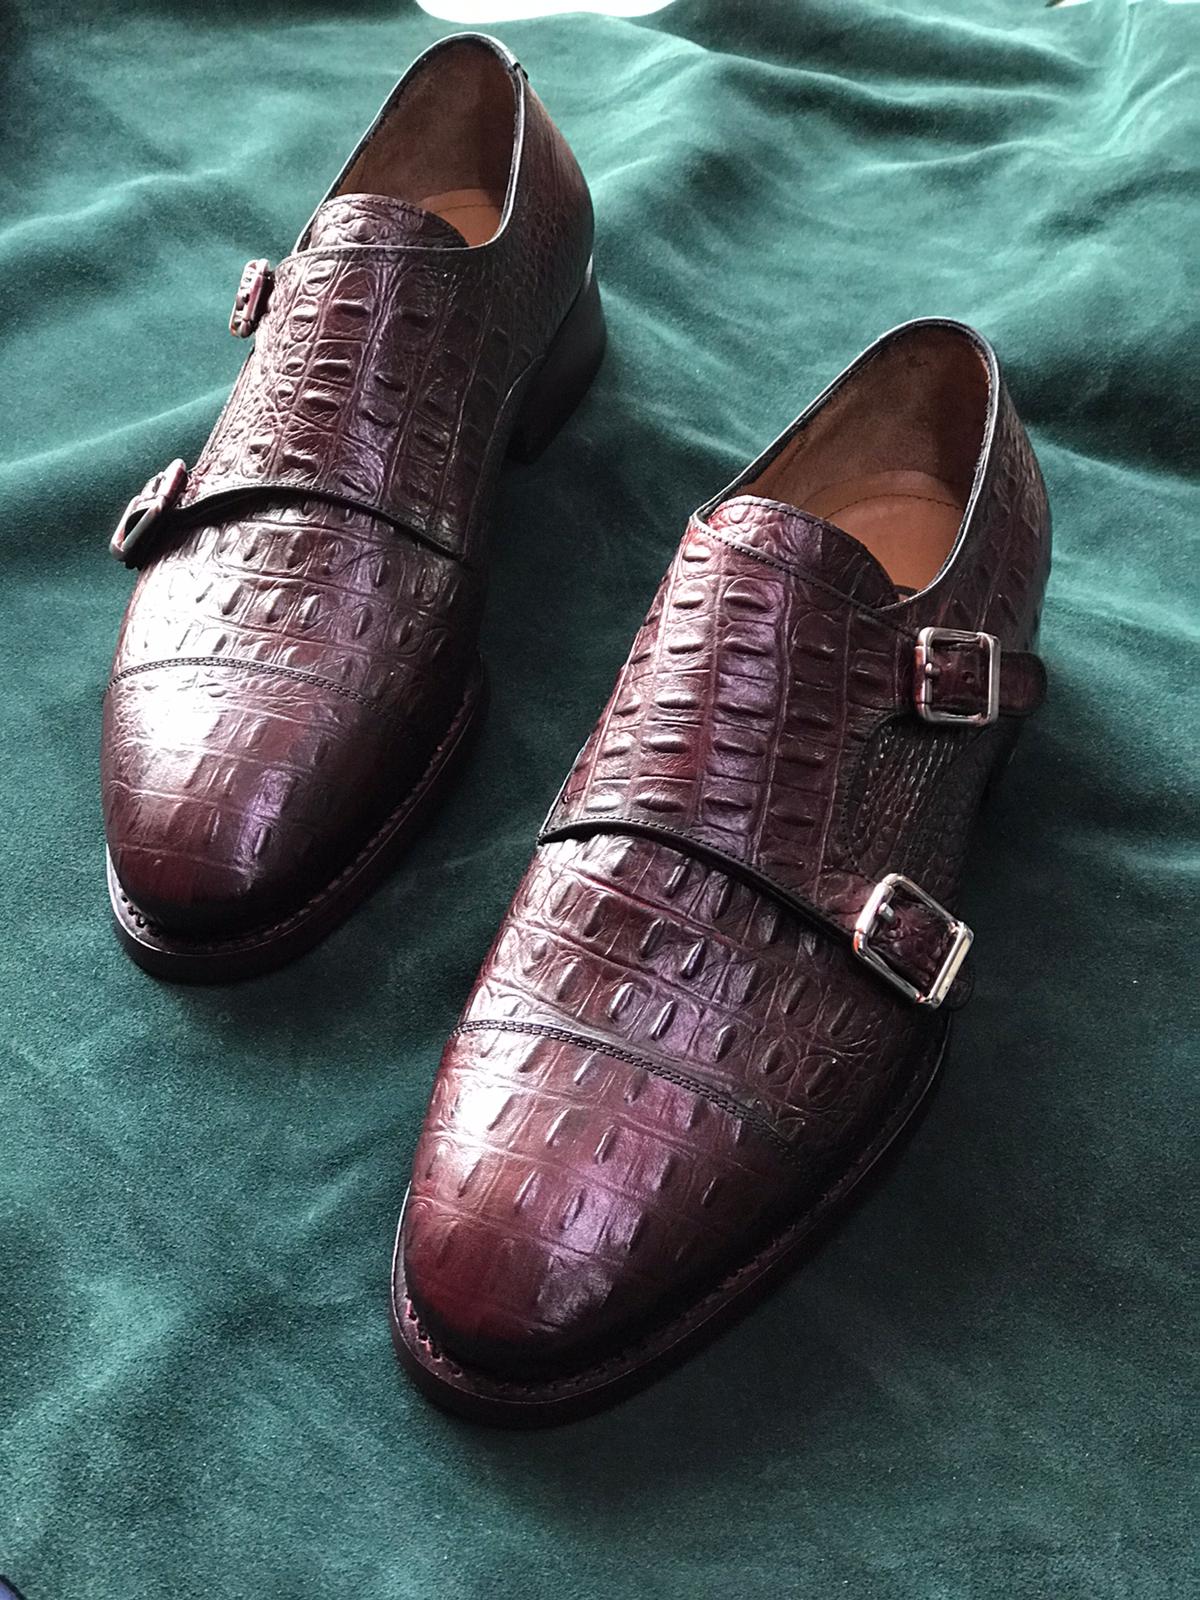 Buy Brown Bespoke Shoes by Gentwith.com with Free Shipping